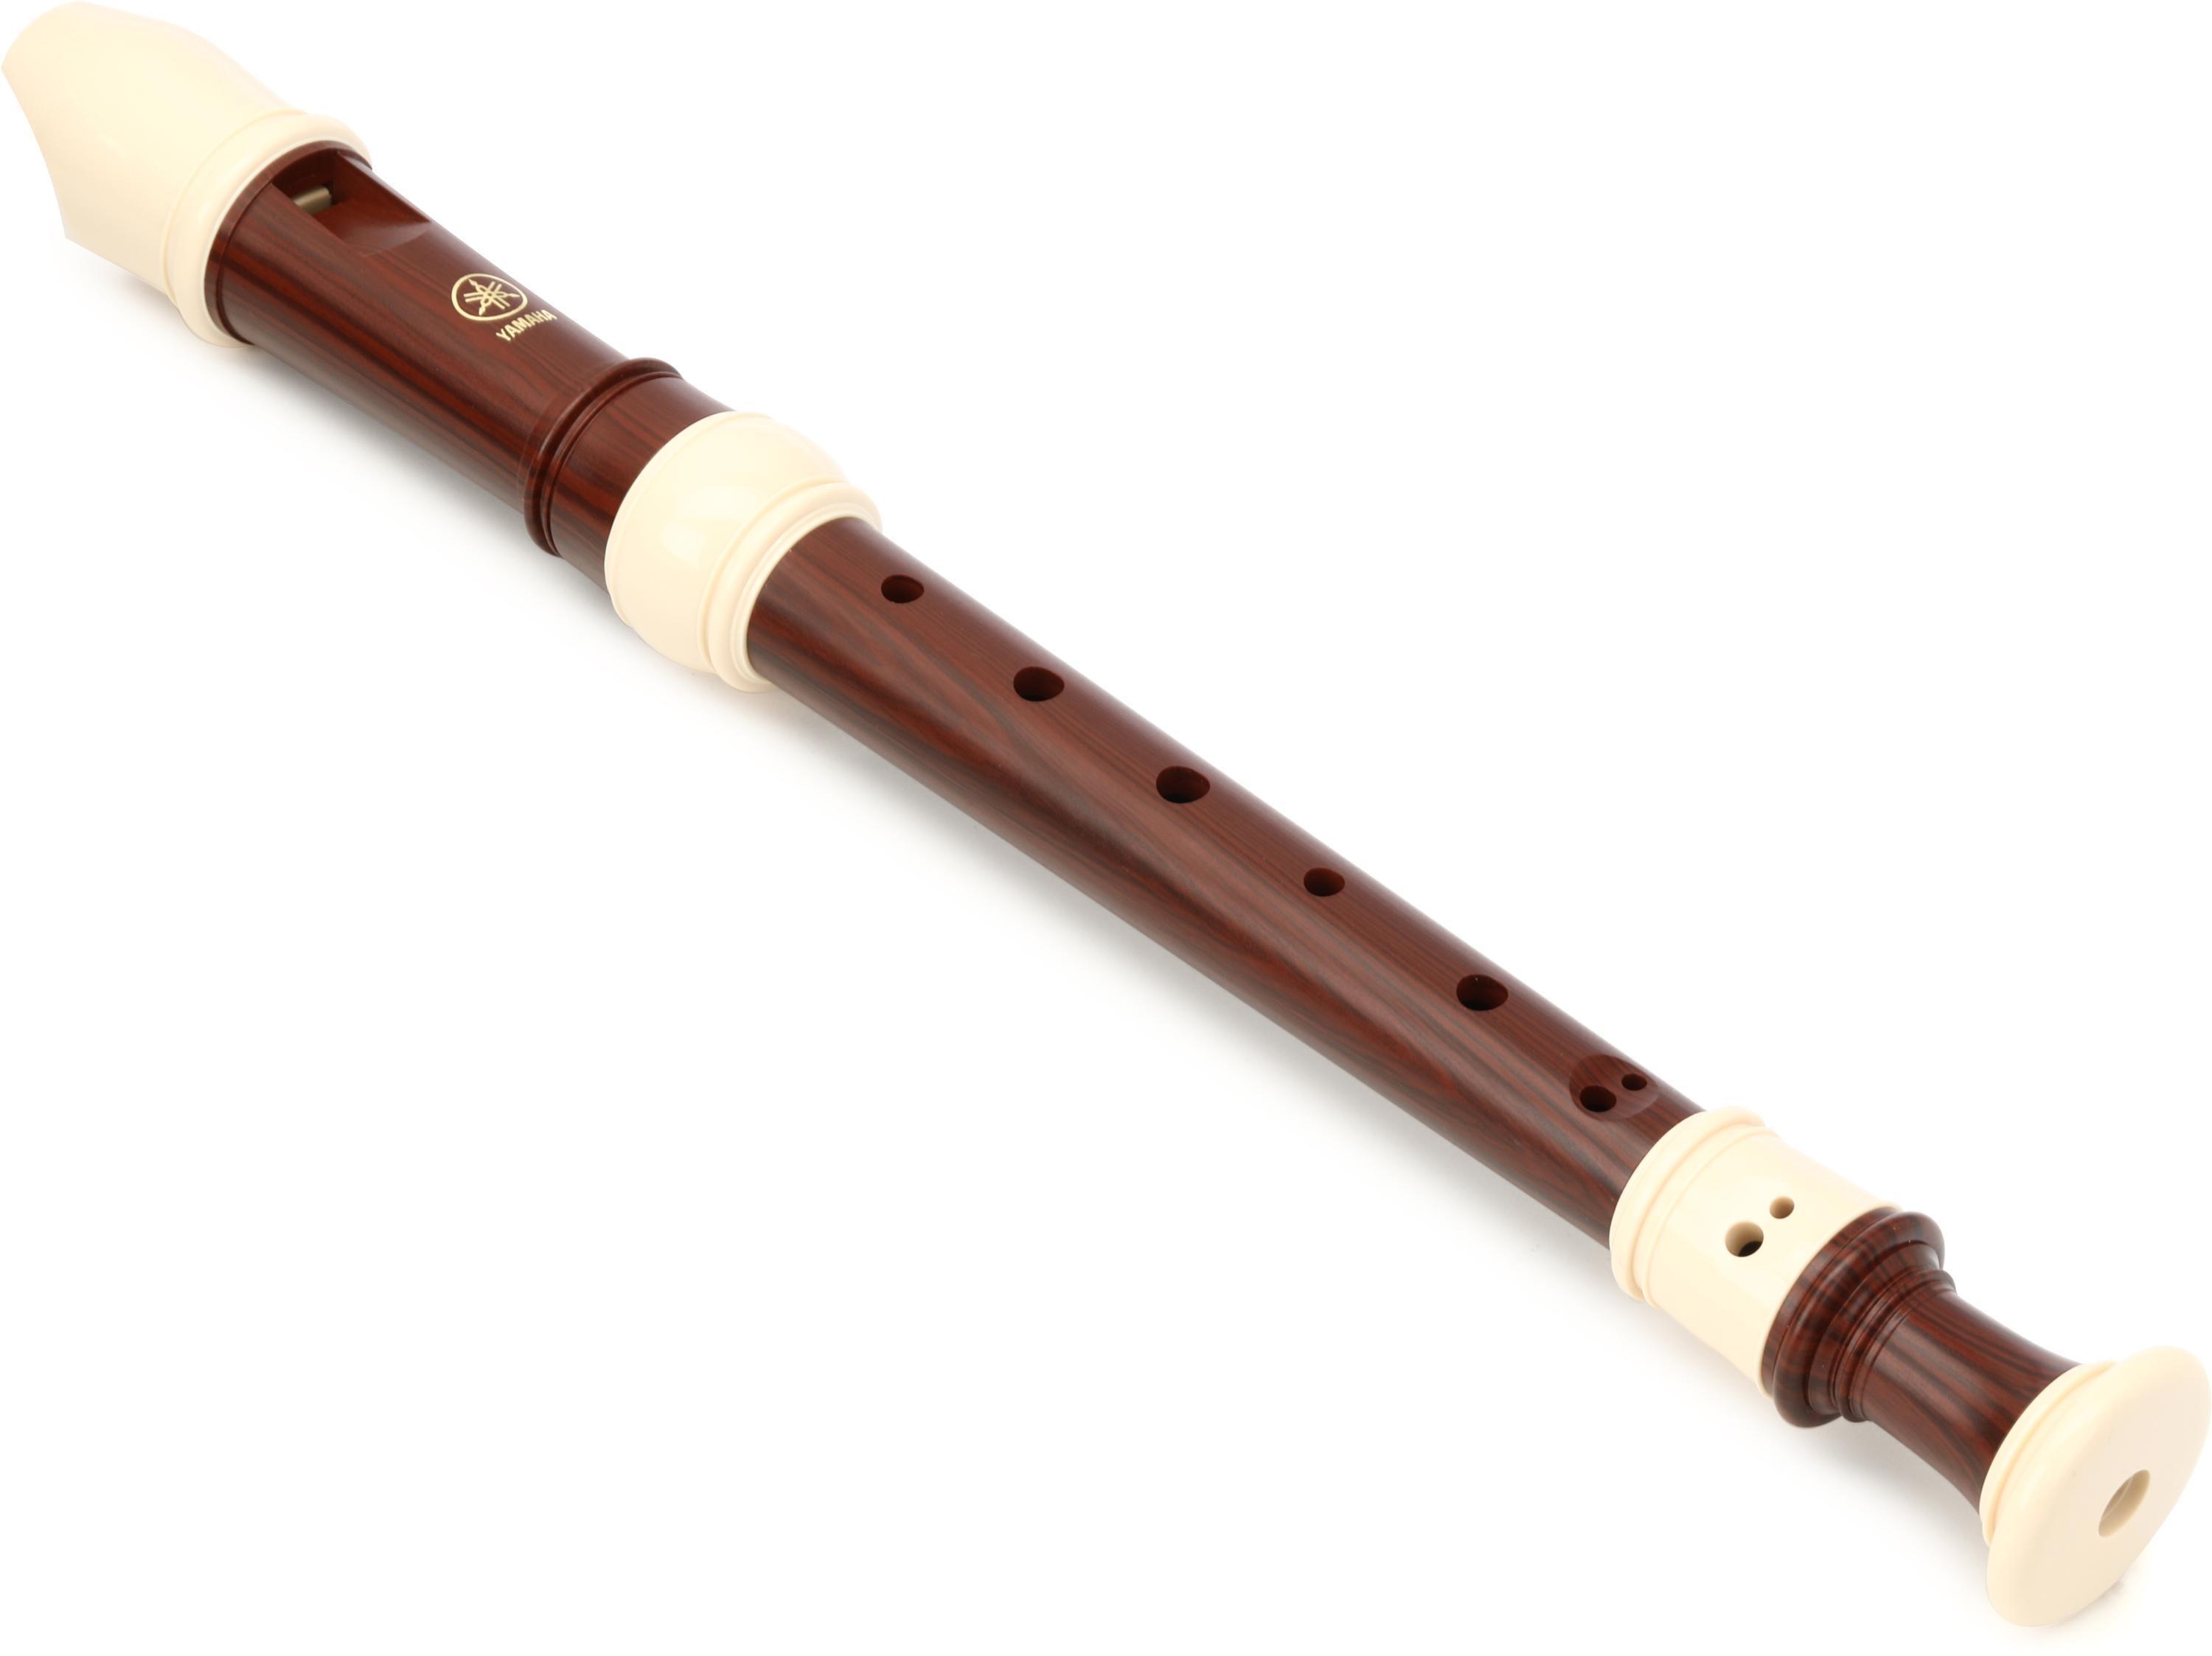 Soprano - Overview - Recorders - Brass & Woodwinds - Musical Instruments -  Products - Yamaha USA